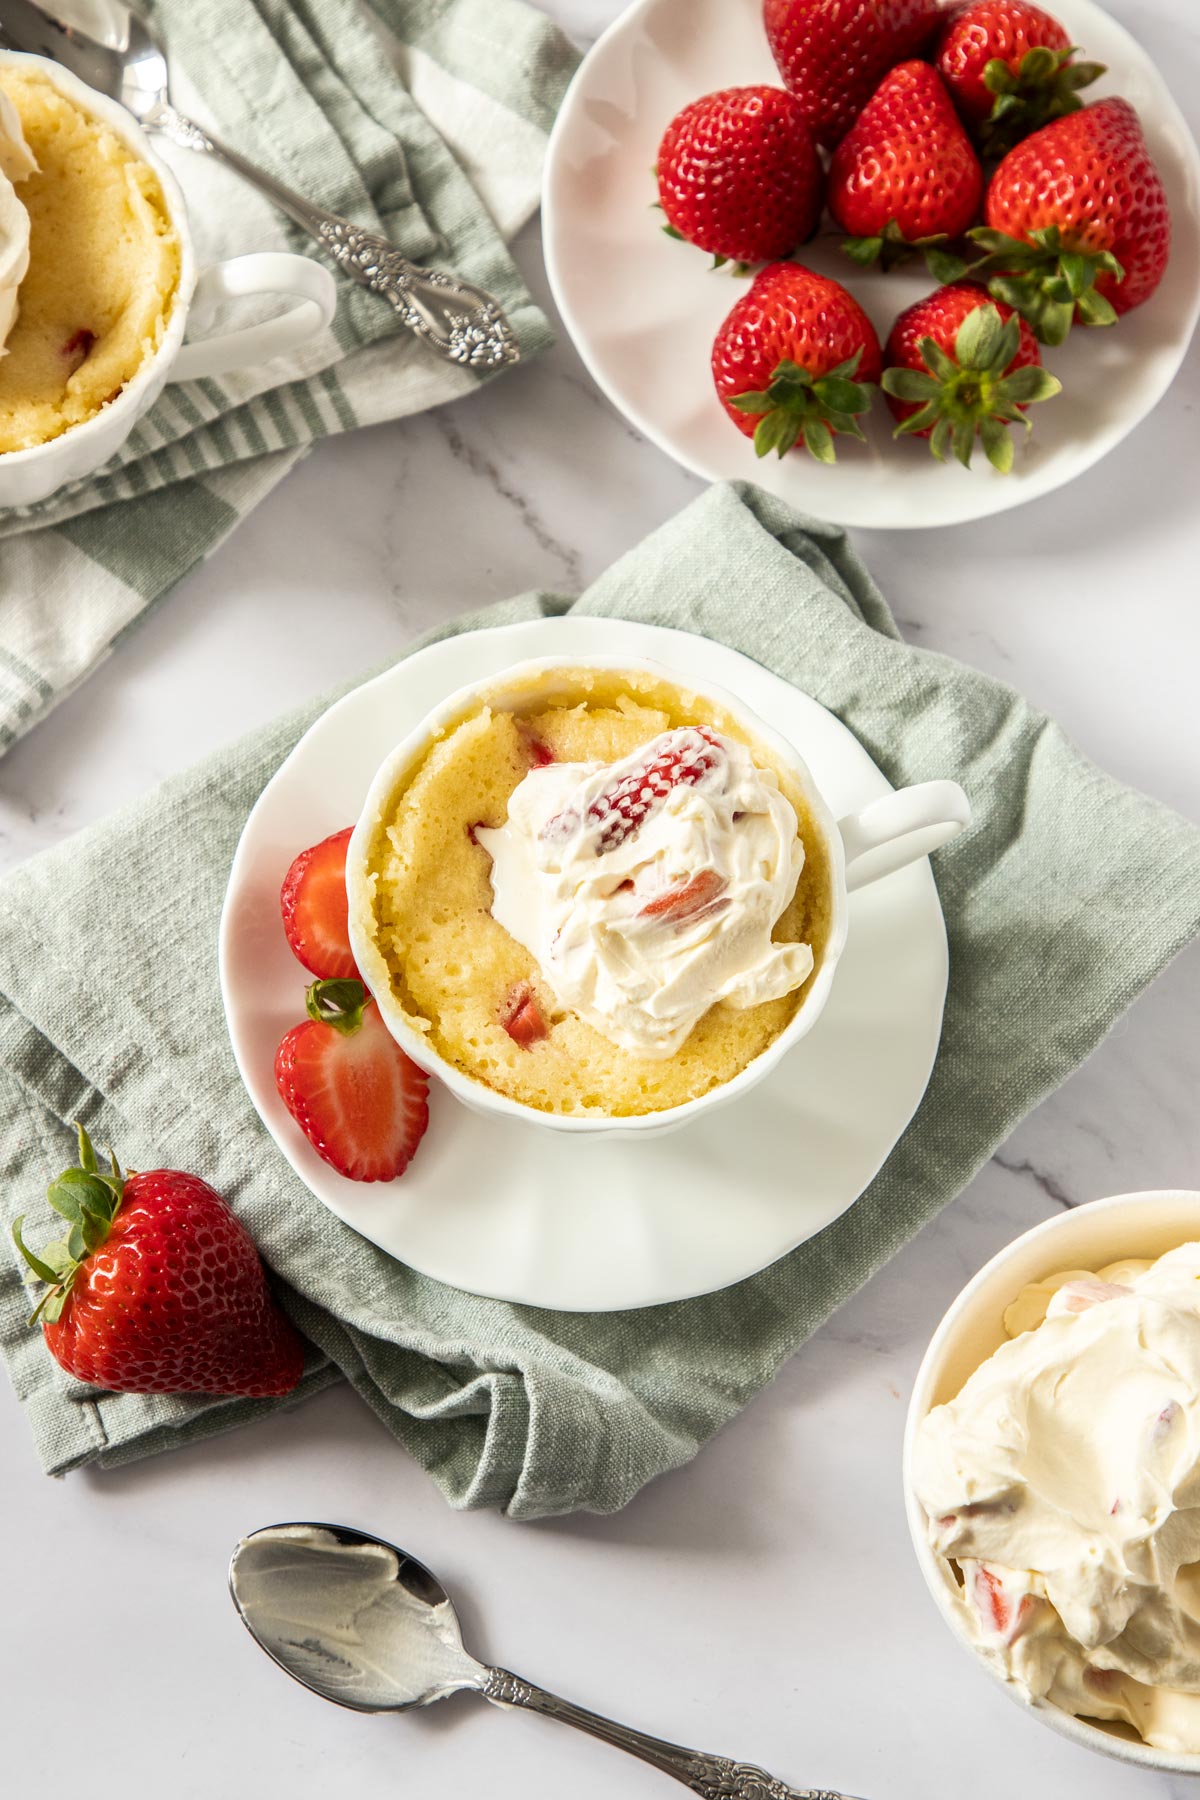 Top down photo of strawberry shortcake in a mug surrounded by fresh strawberries, cream, and table linen.